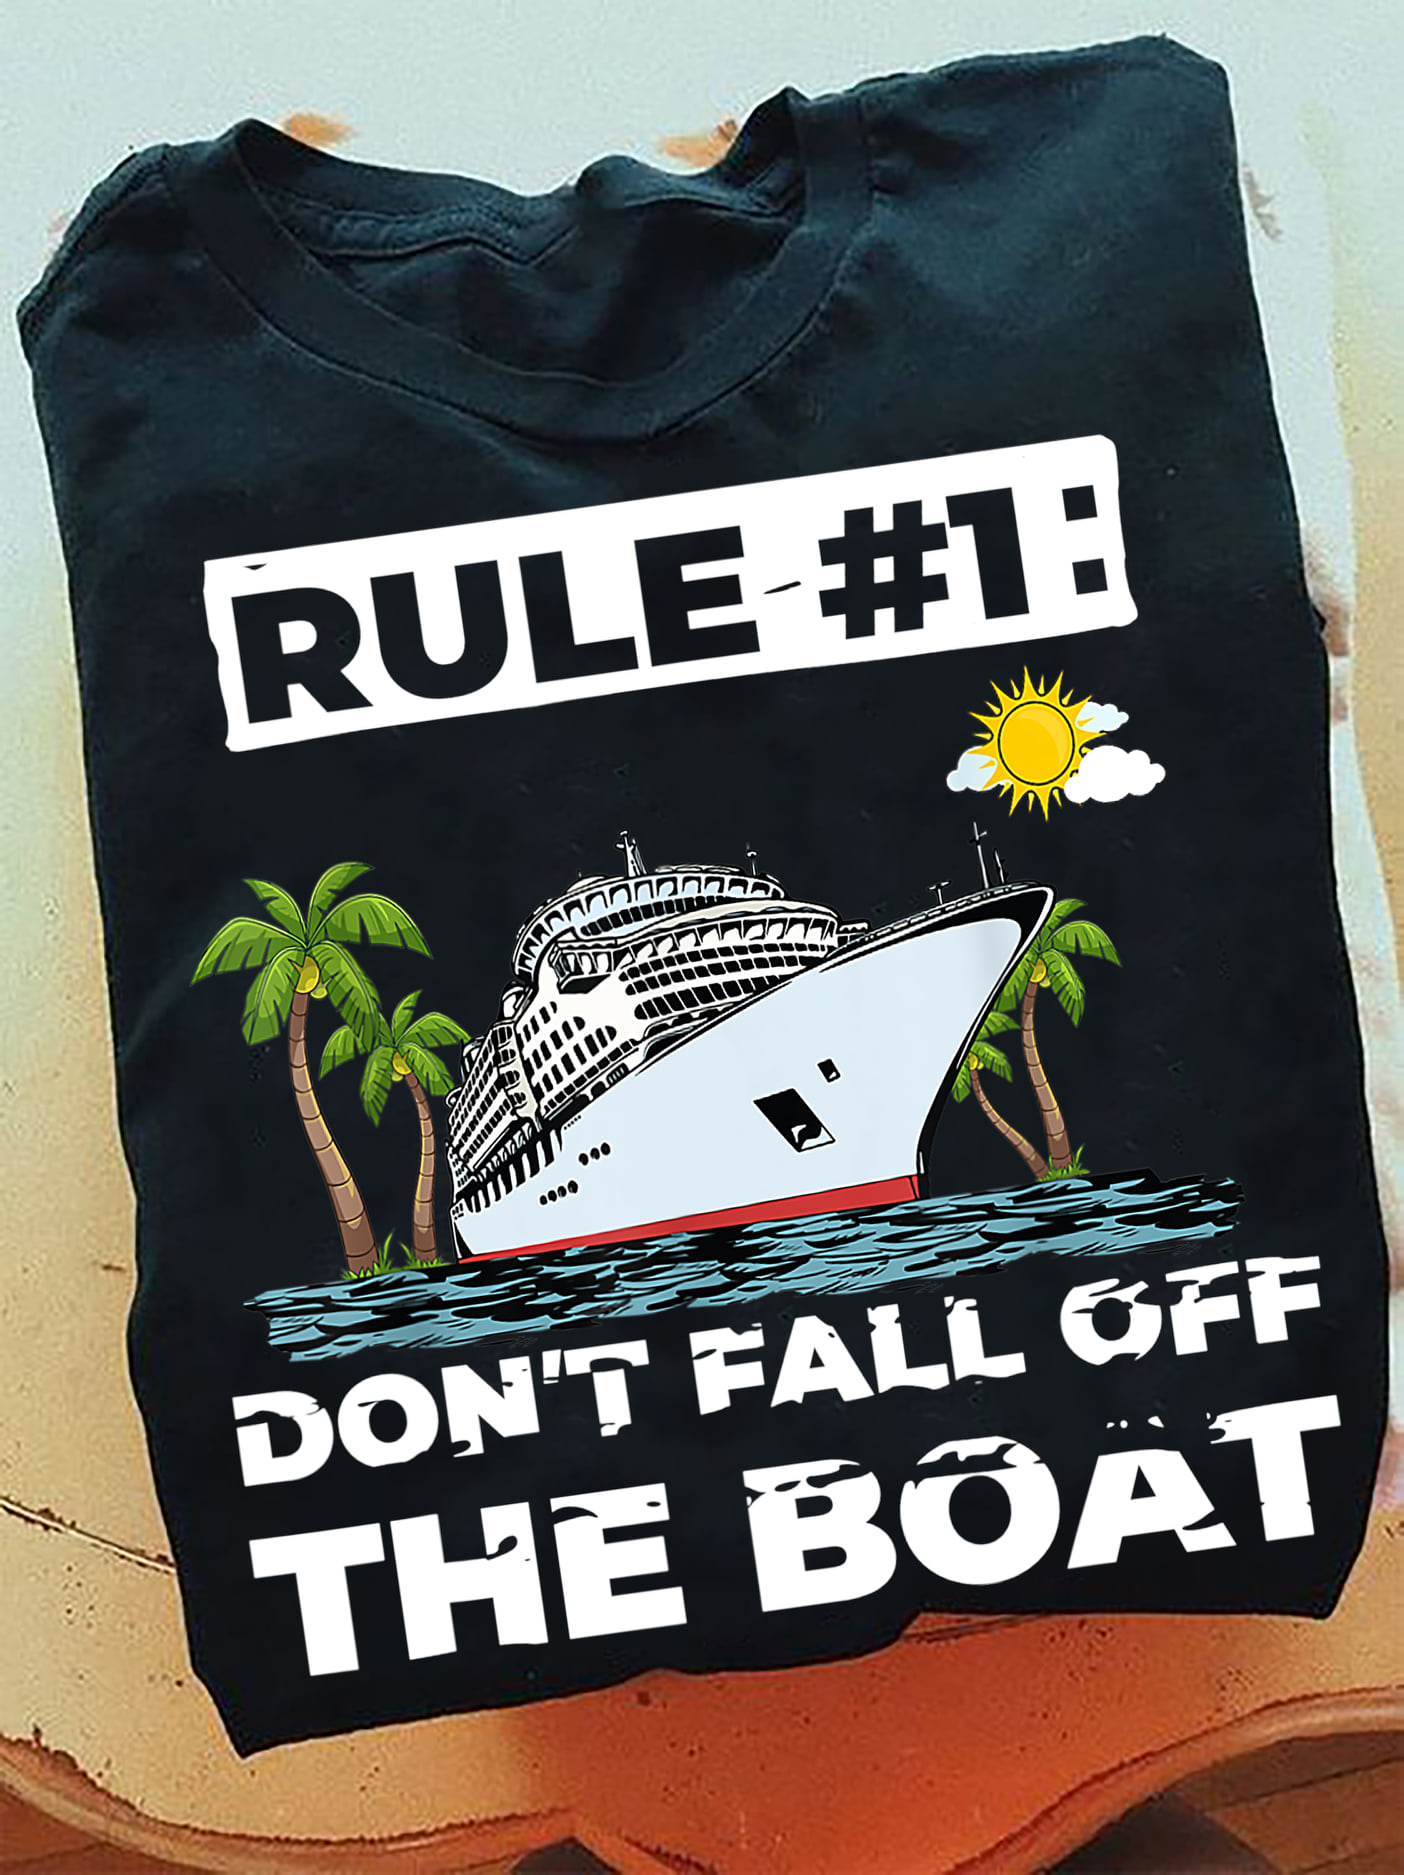 Rule 1 Don't fall off the boat - Love cruising